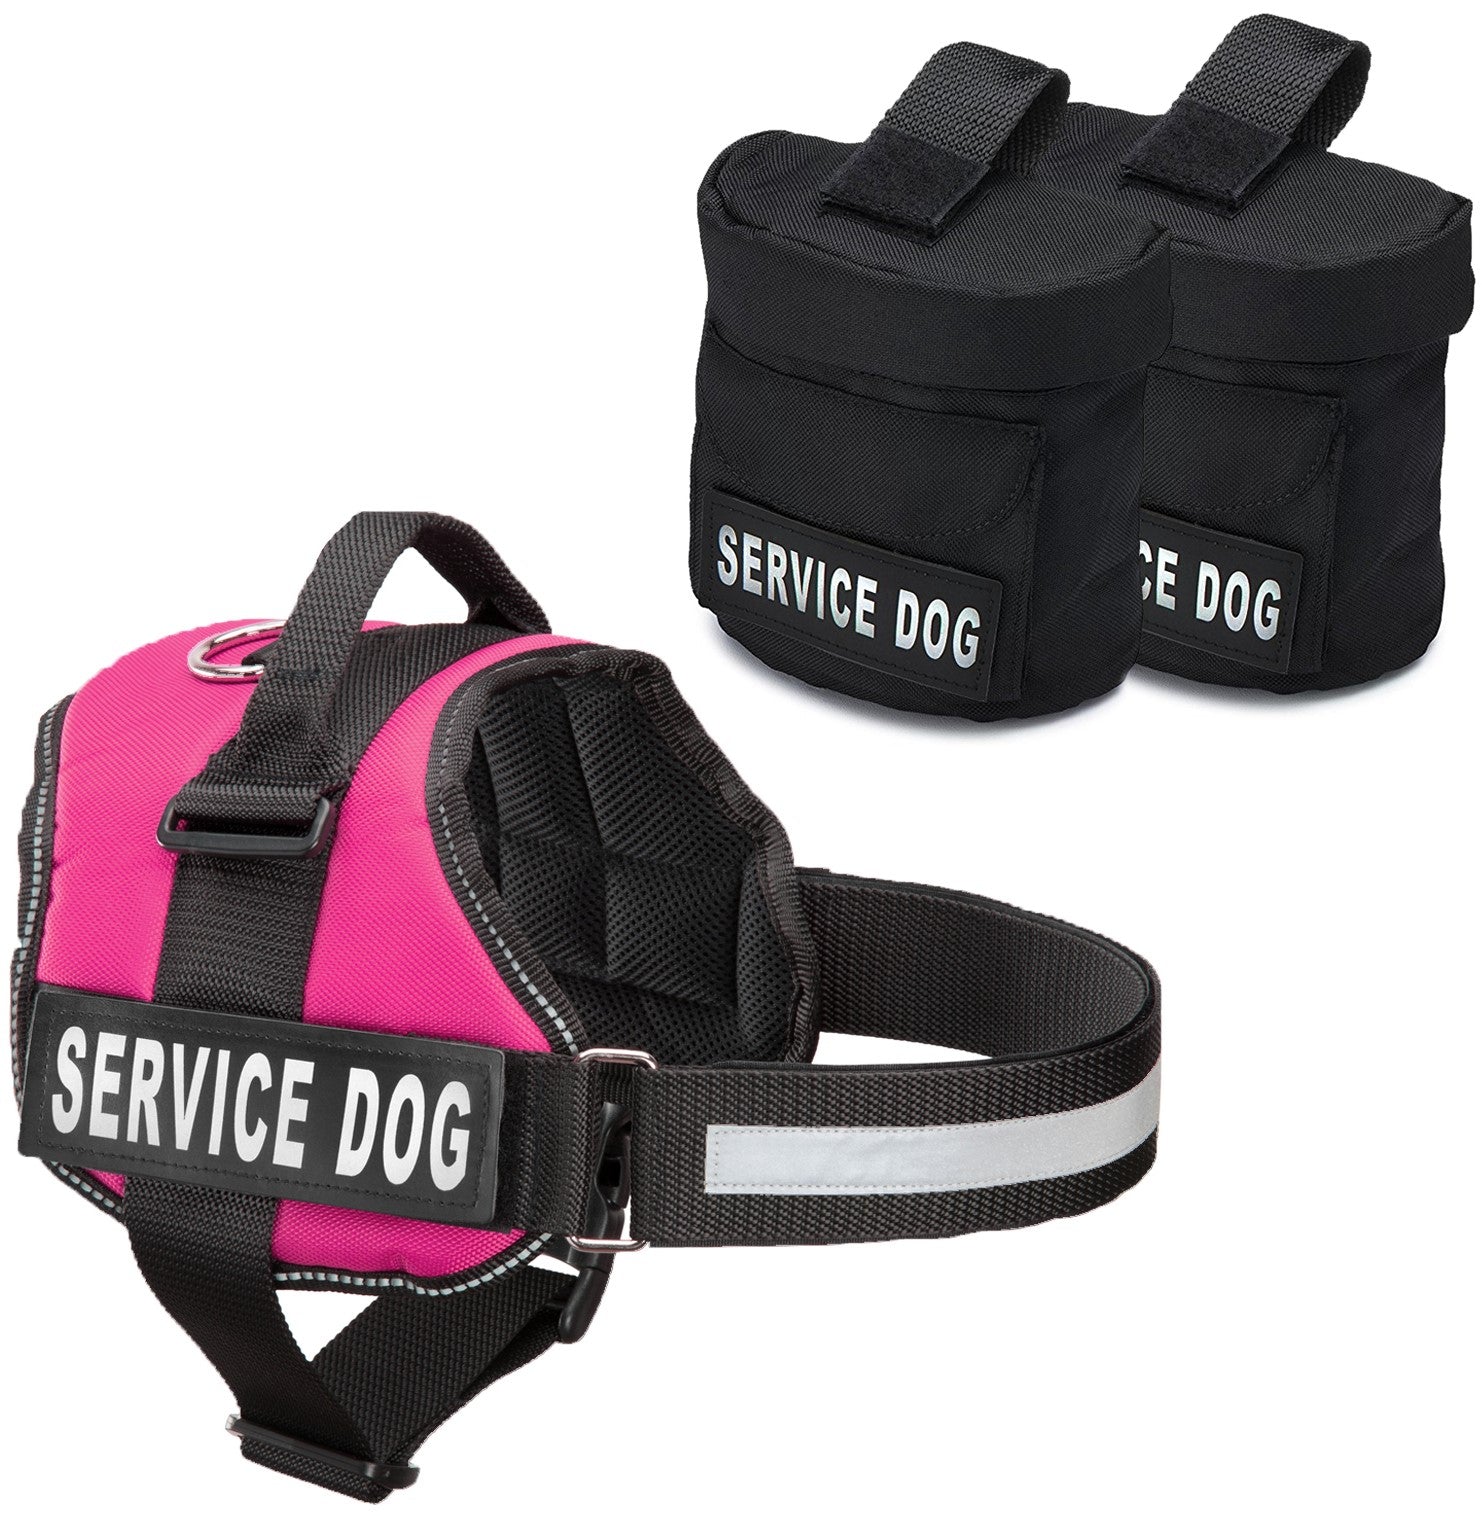 Service Dog Harness w/ 2 Removable Saddle Bags PLUS 4 "SERVICE DOG" Ve – Industrial